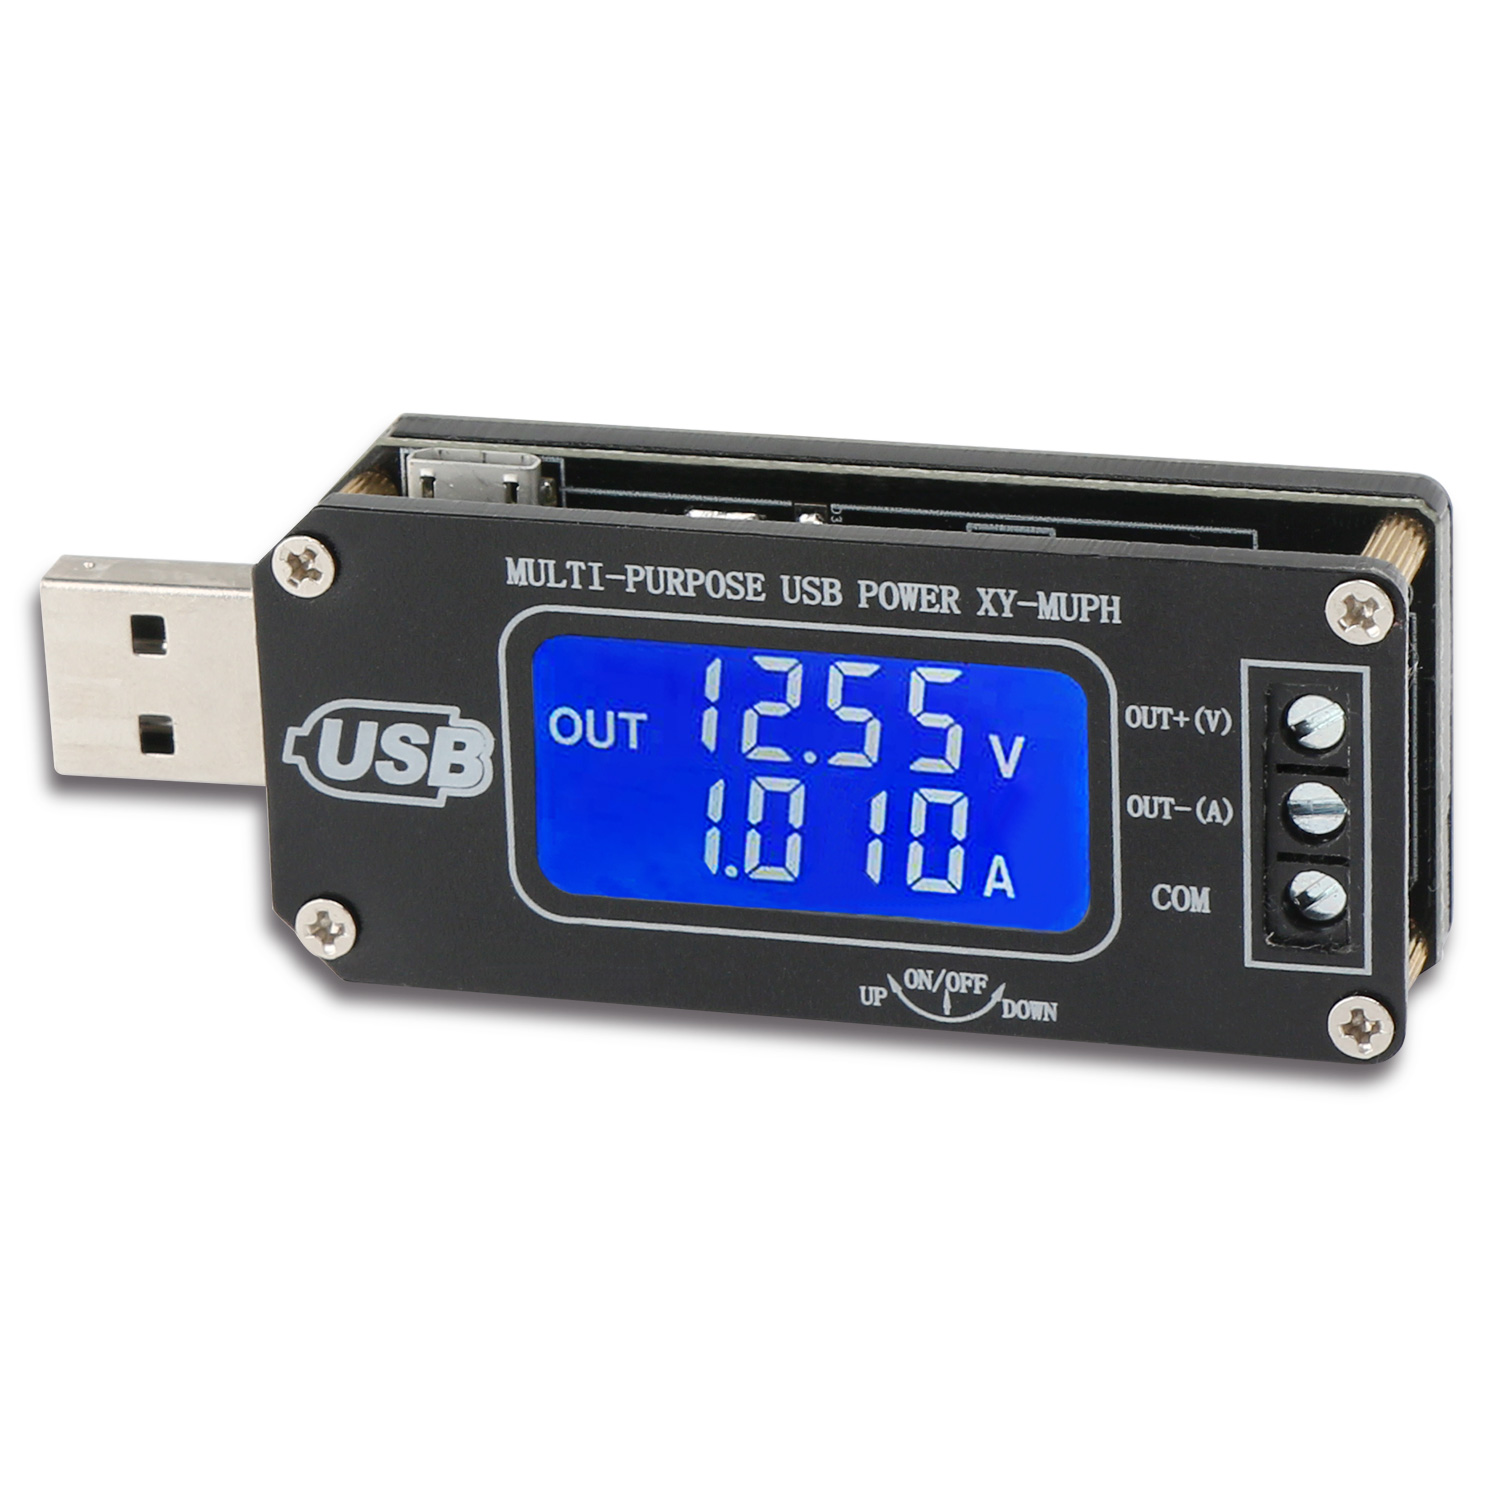 Liobaba USB Multifunction Tester Digital Display USB Booster 5V to 9V/12V USB to DC Round Hole Charger Tester Power Supply For Router